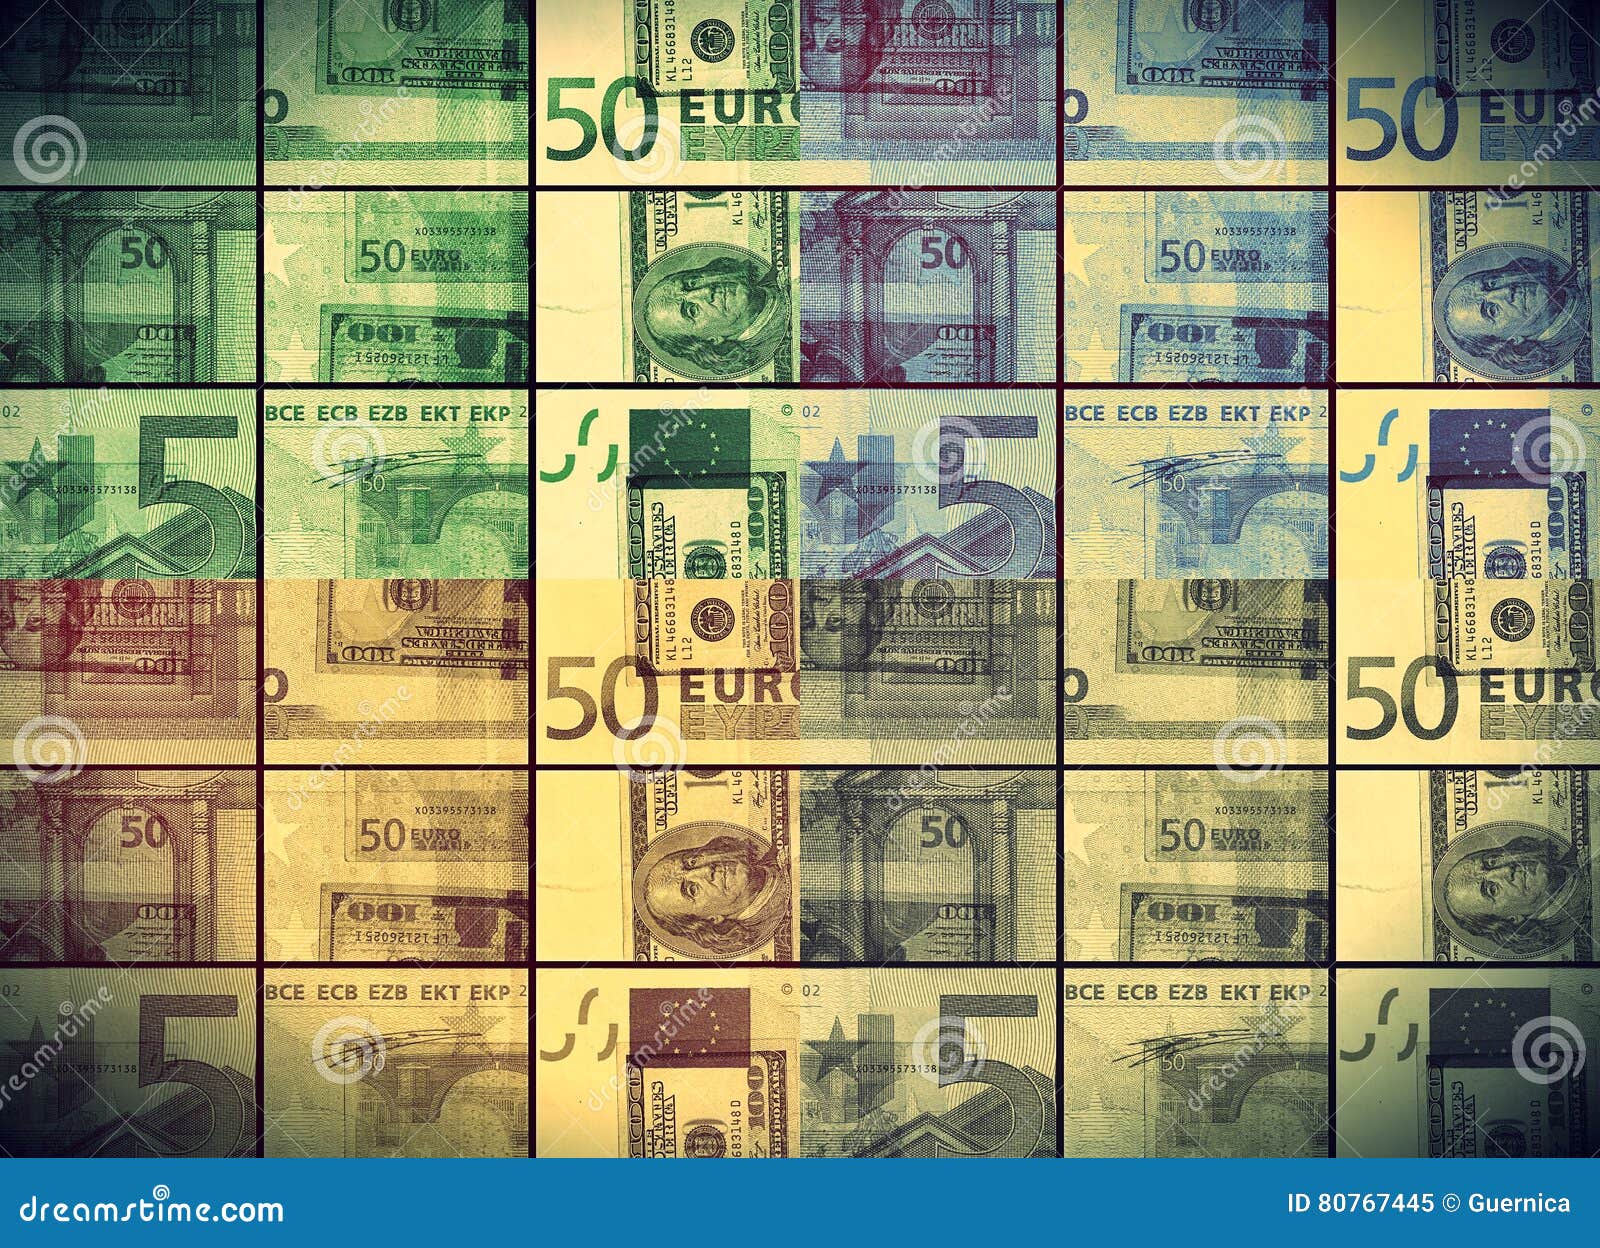 50 euros banknote bill in colored collage